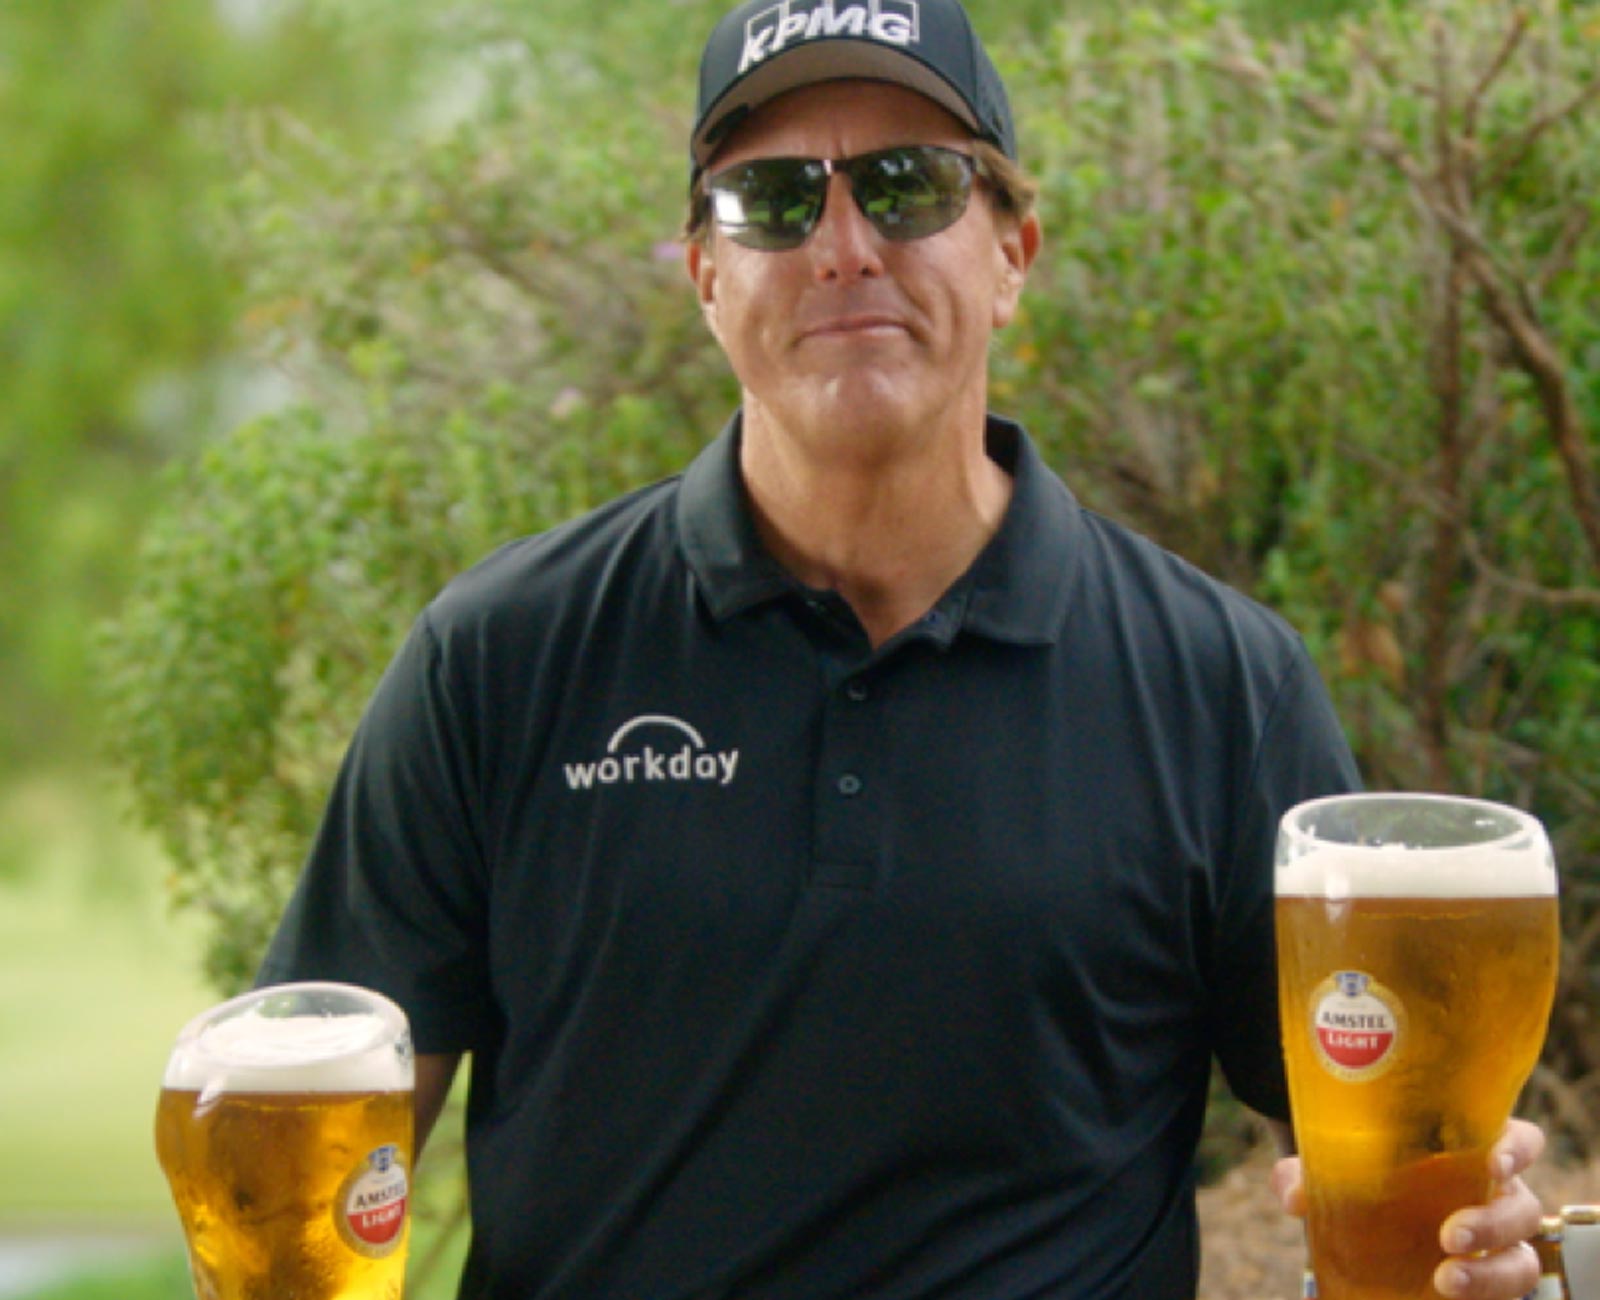 detroit free press phil mickelson